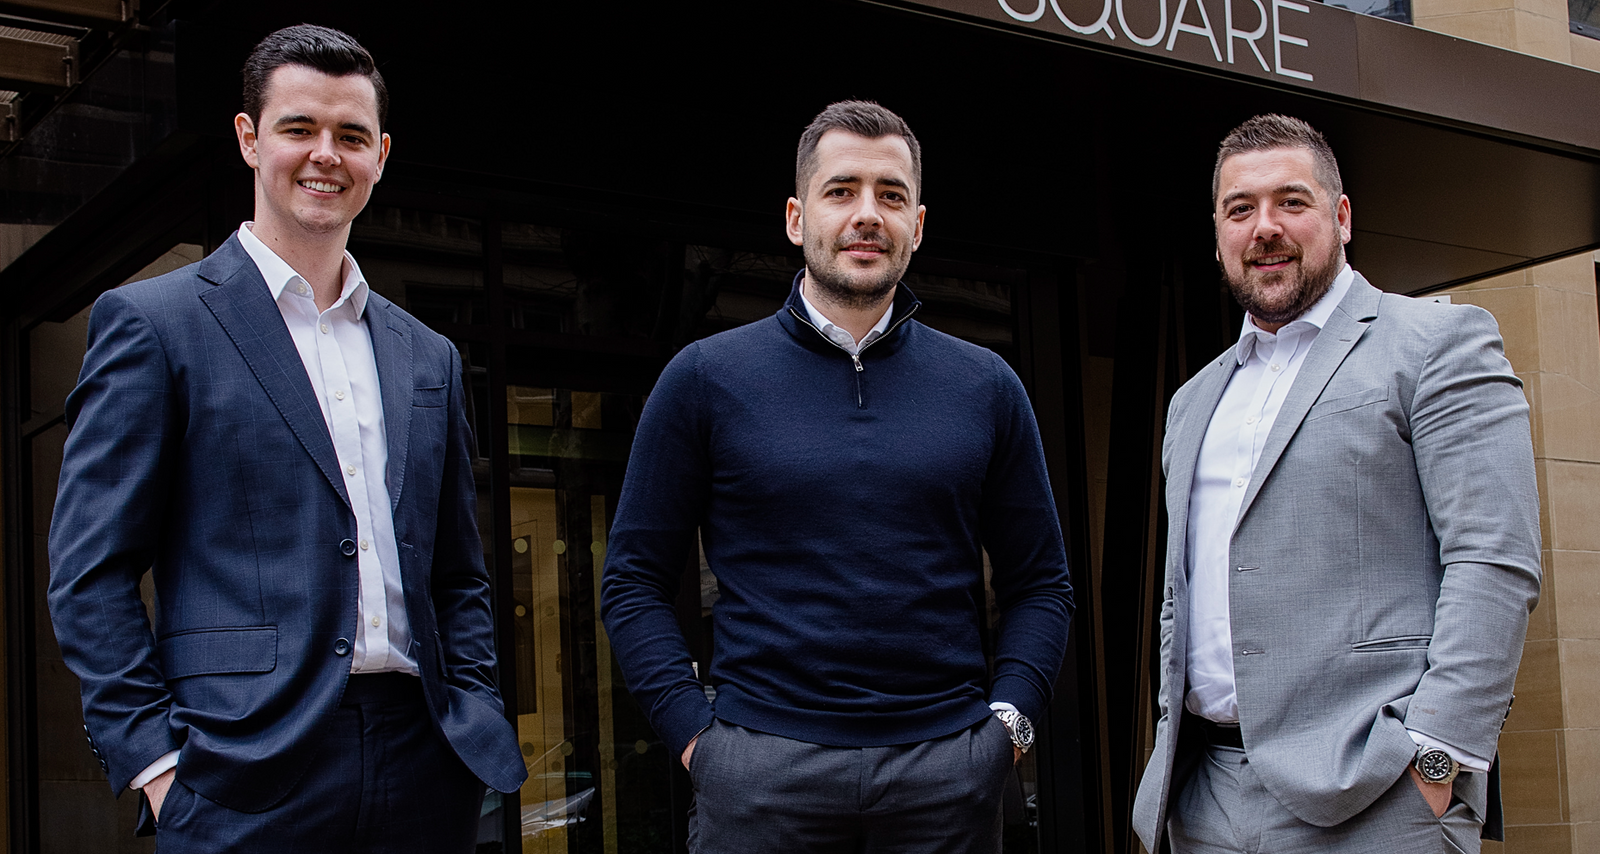 New headquarters for fast-growing specialist recruitment company